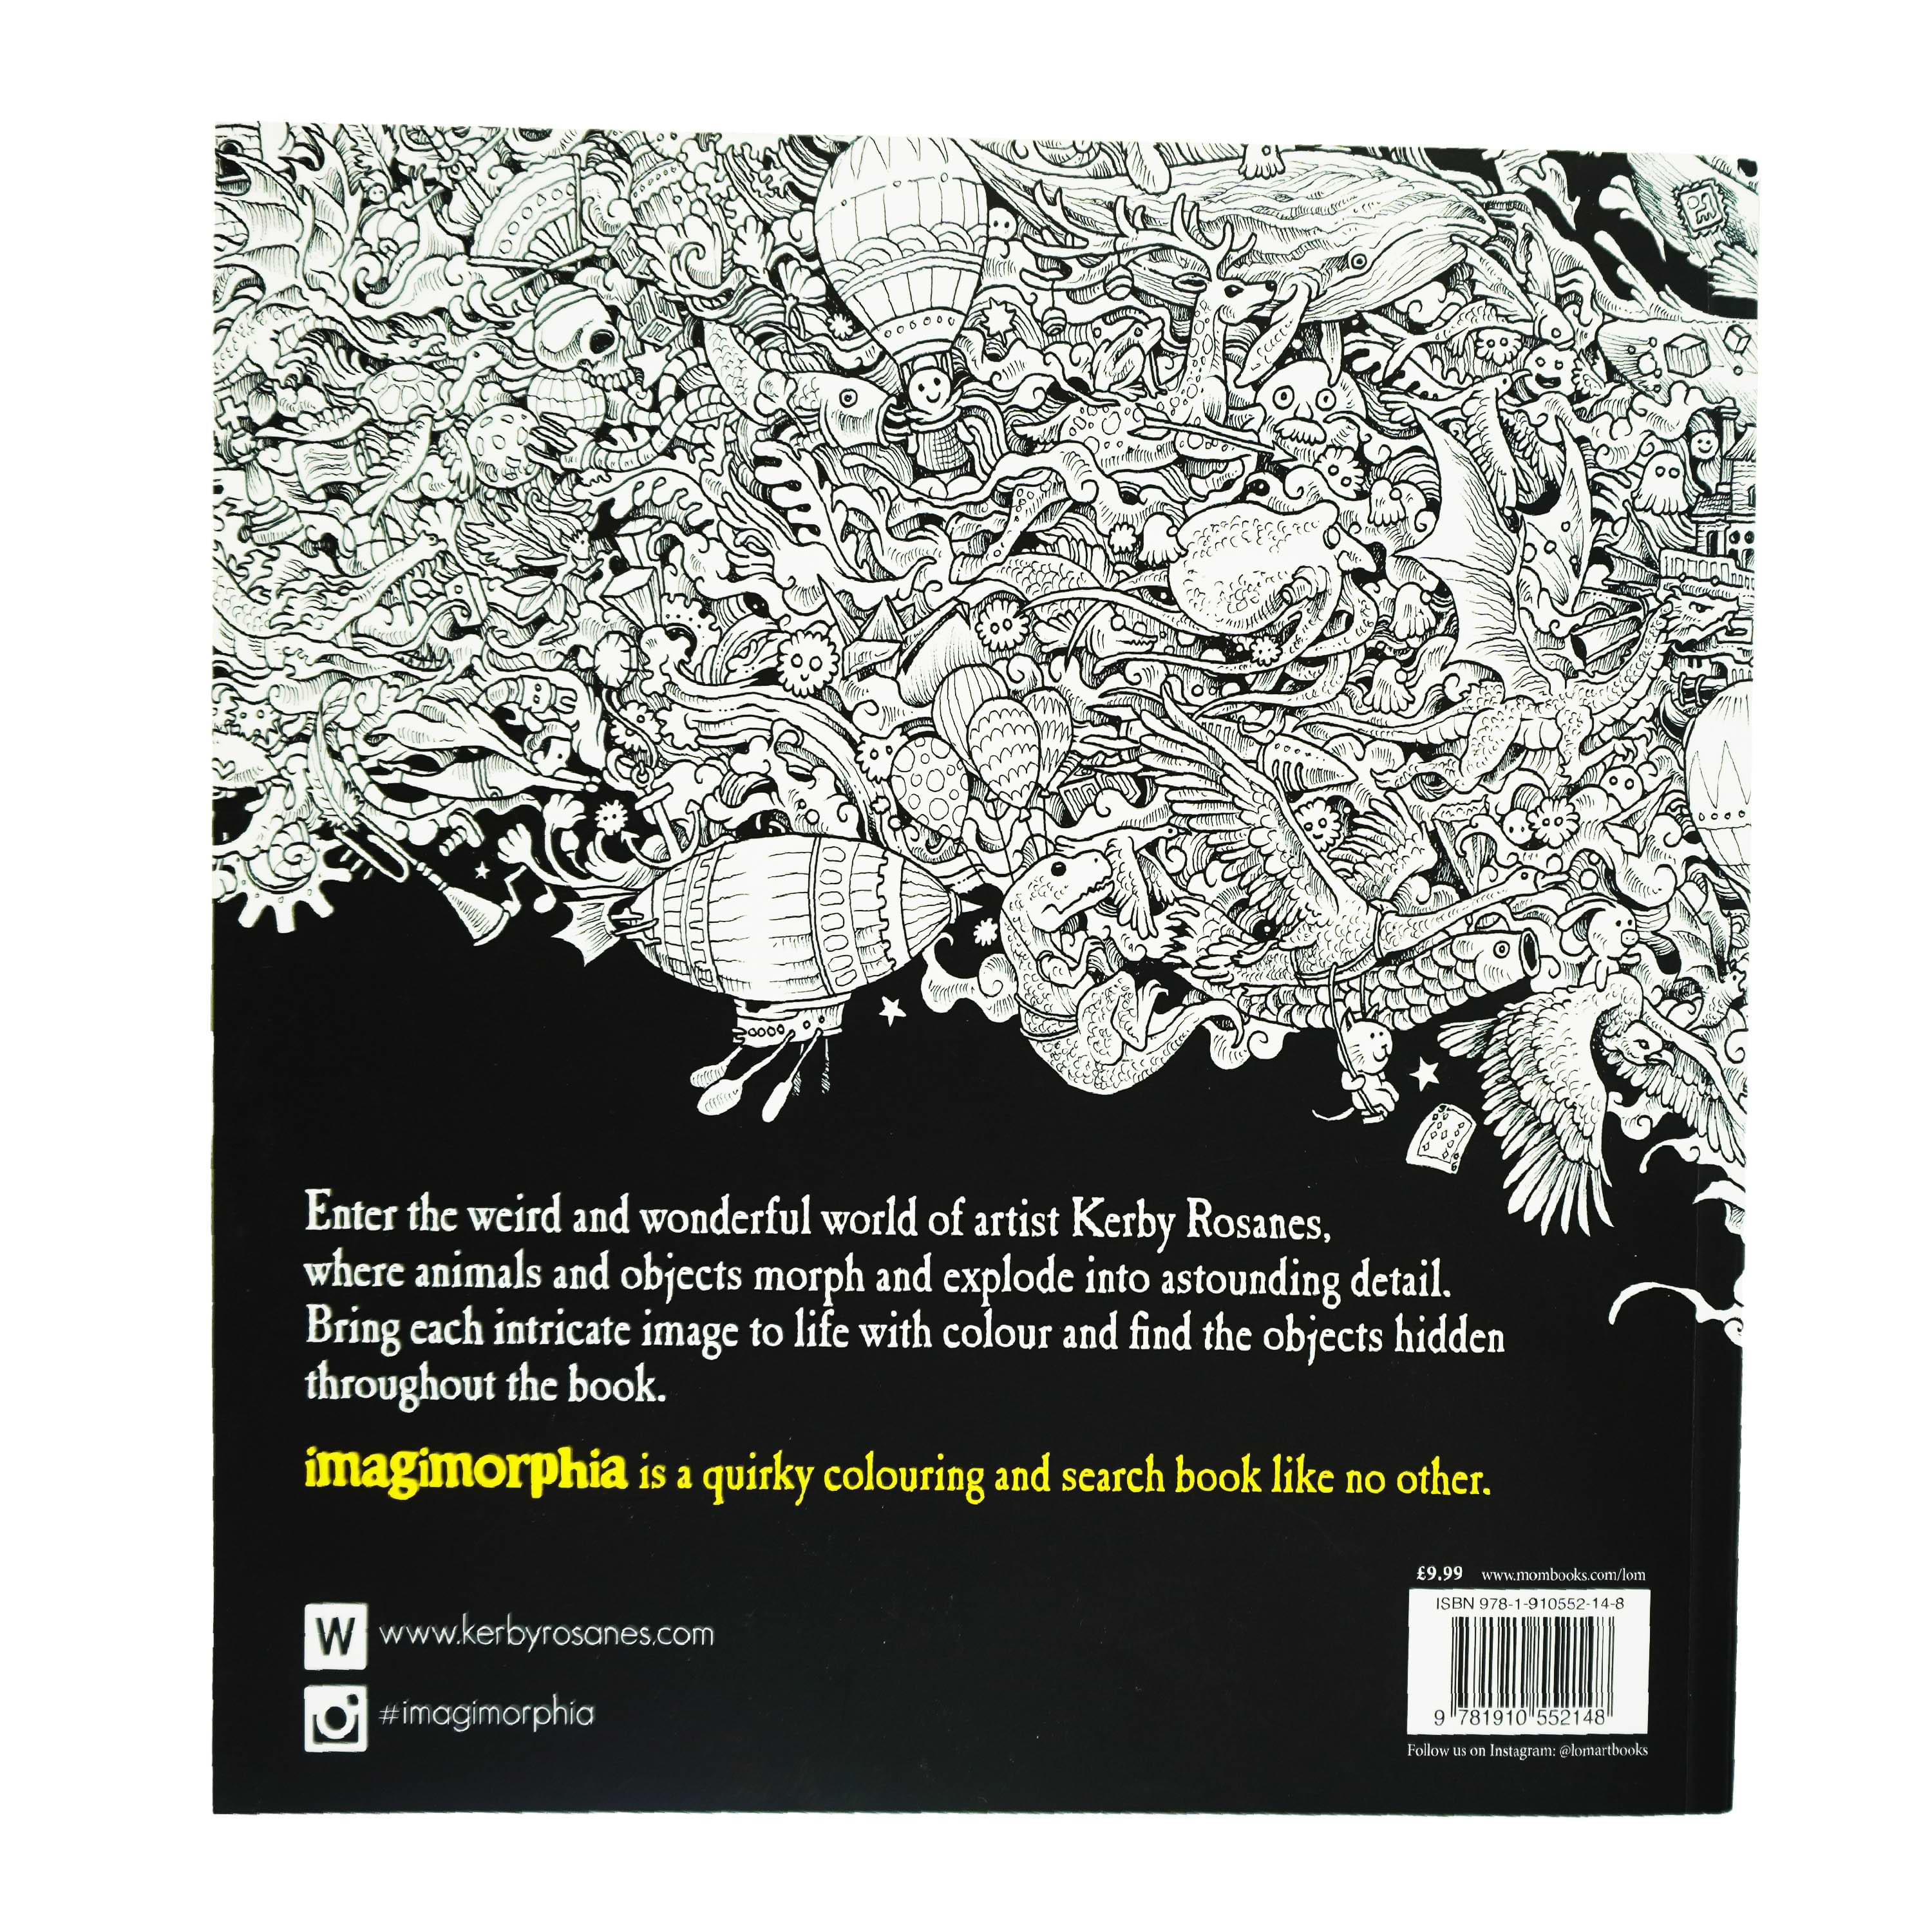 Imagimorphia: An Extreme Coloring and Search Challenge by Kerby Rosanes,  Paperback